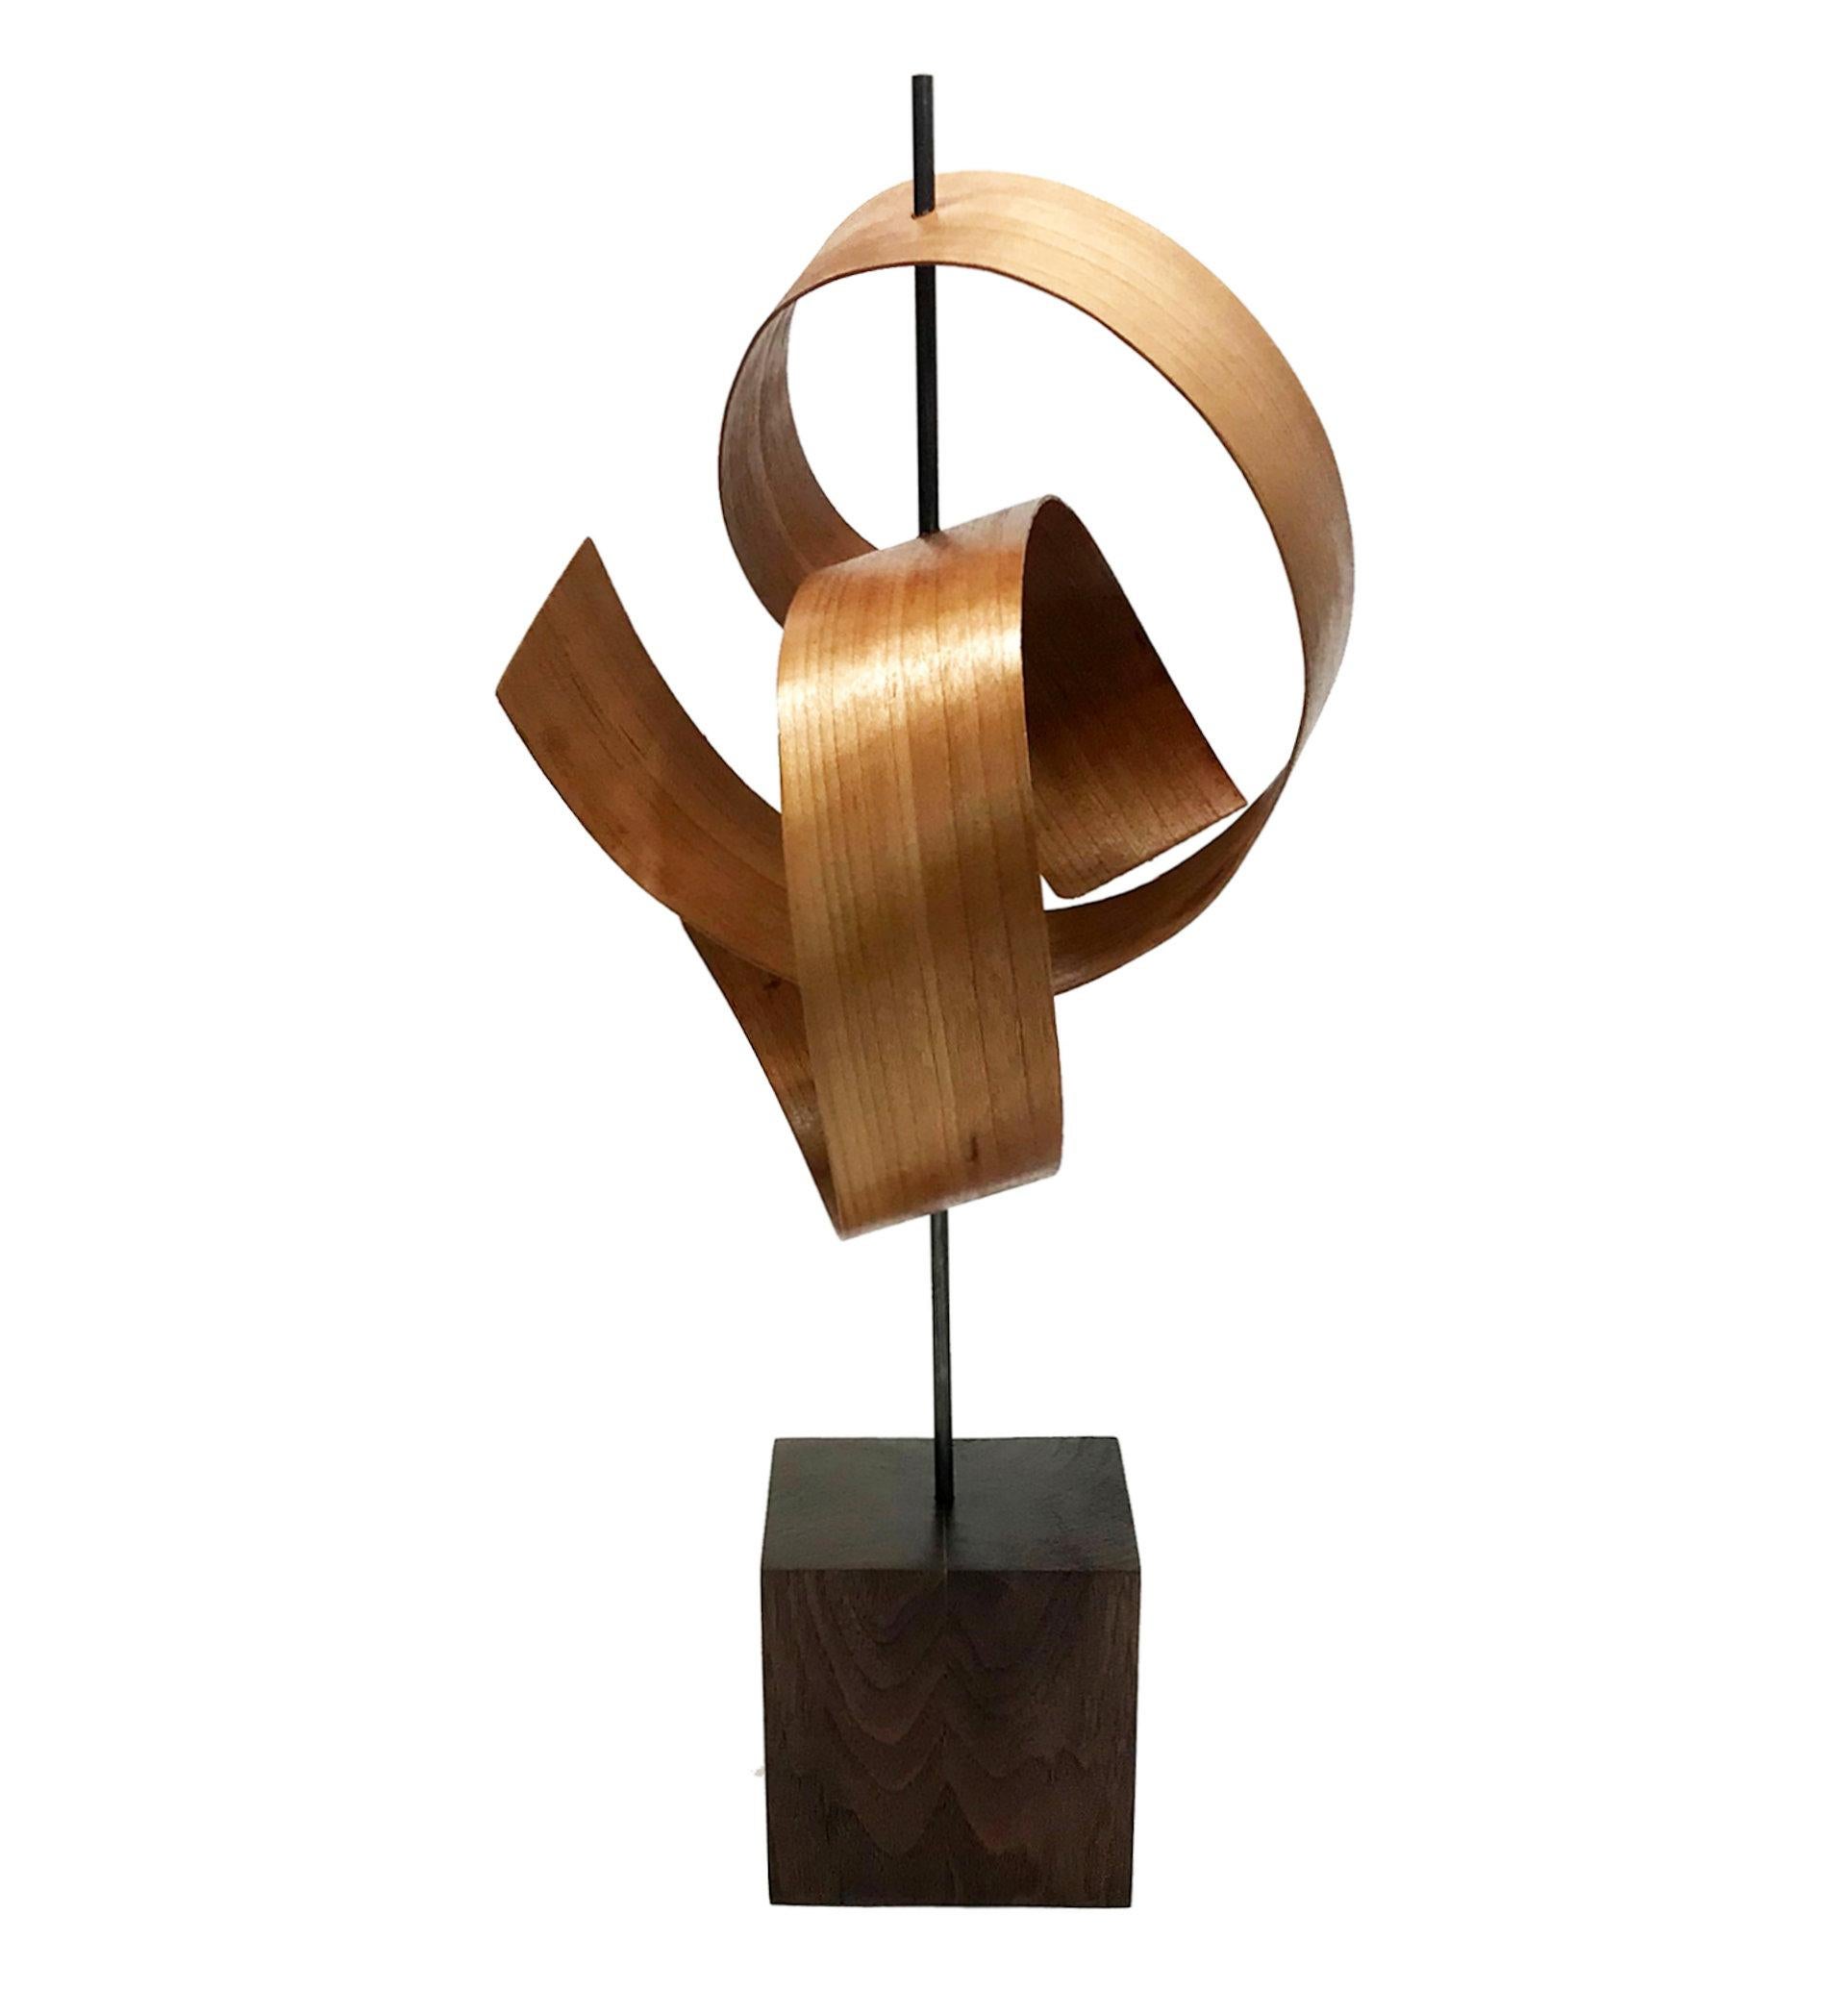 Description:  This sculpture consists of bent 1/8x2" mahogany on a black walnut base. This sculpture is an open-edition multiple original; hand-made by the artist.
Title: Ripcurl

Artist Bio:
Jeff was born and raised in Toledo Ohio and is a graduate